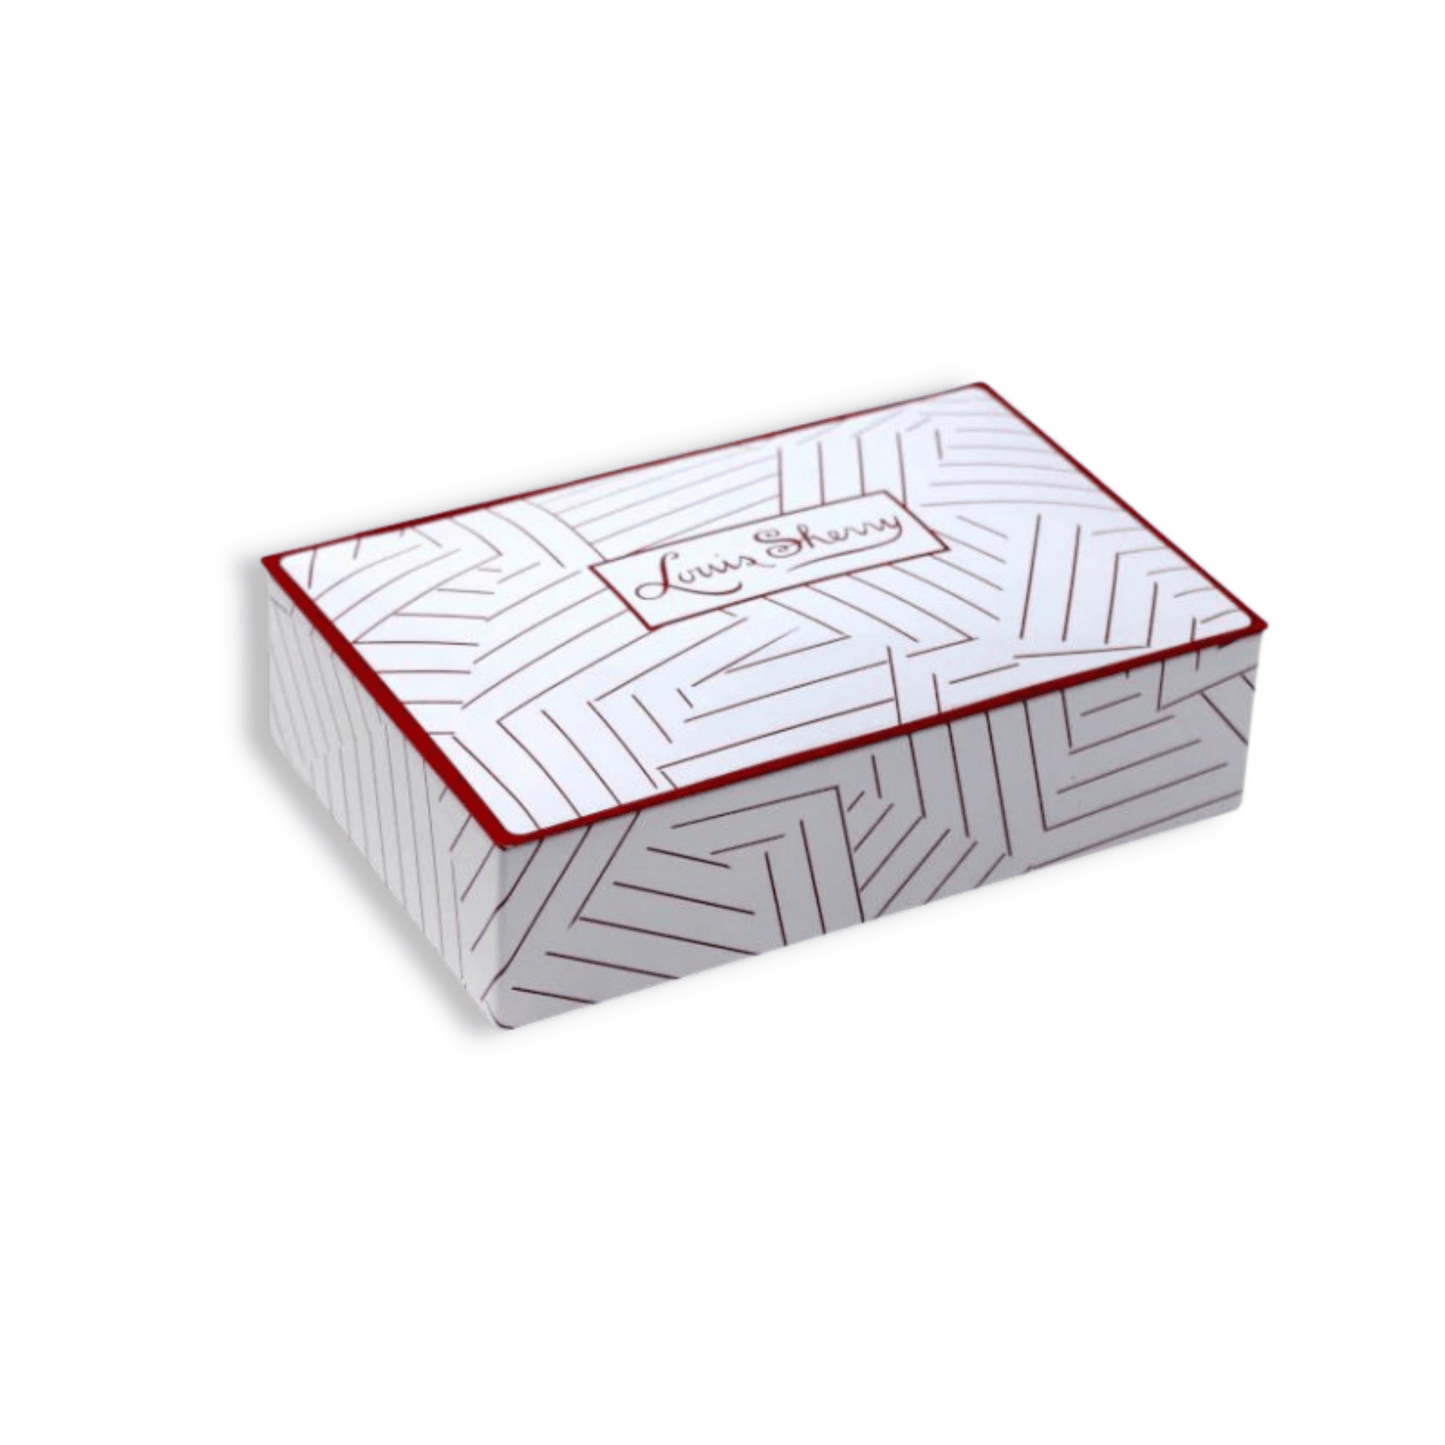 Primary Image of Miles Redd Deconstructed Stripe Chocolate Tin